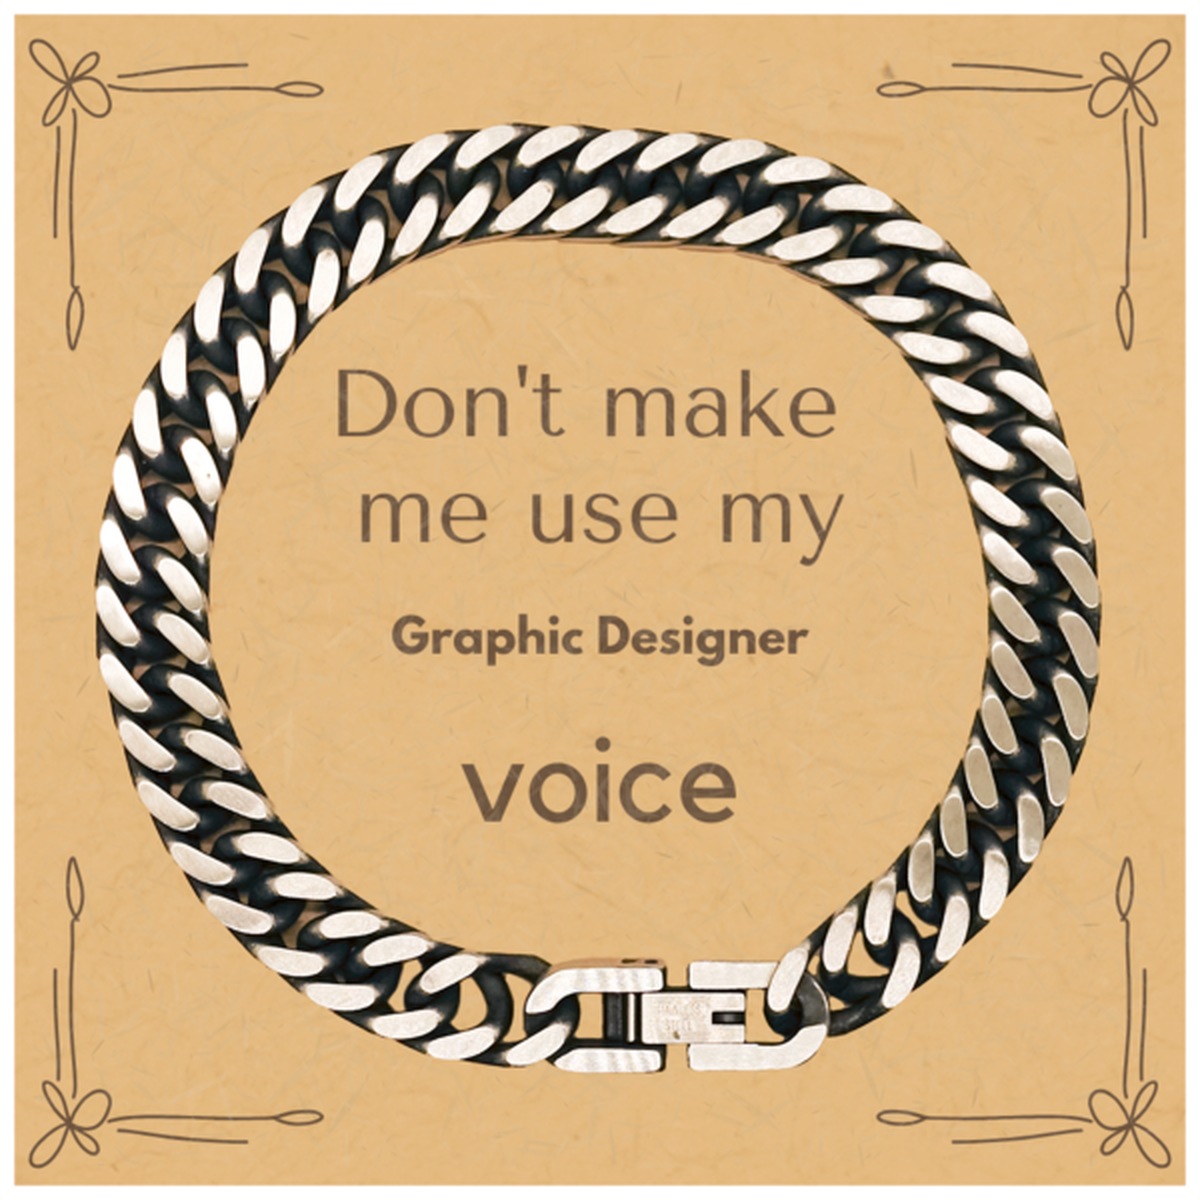 Don't make me use my Graphic Designer voice, Sarcasm Graphic Designer Card Gifts, Christmas Graphic Designer Cuban Link Chain Bracelet Birthday Unique Gifts For Graphic Designer Coworkers, Men, Women, Colleague, Friends